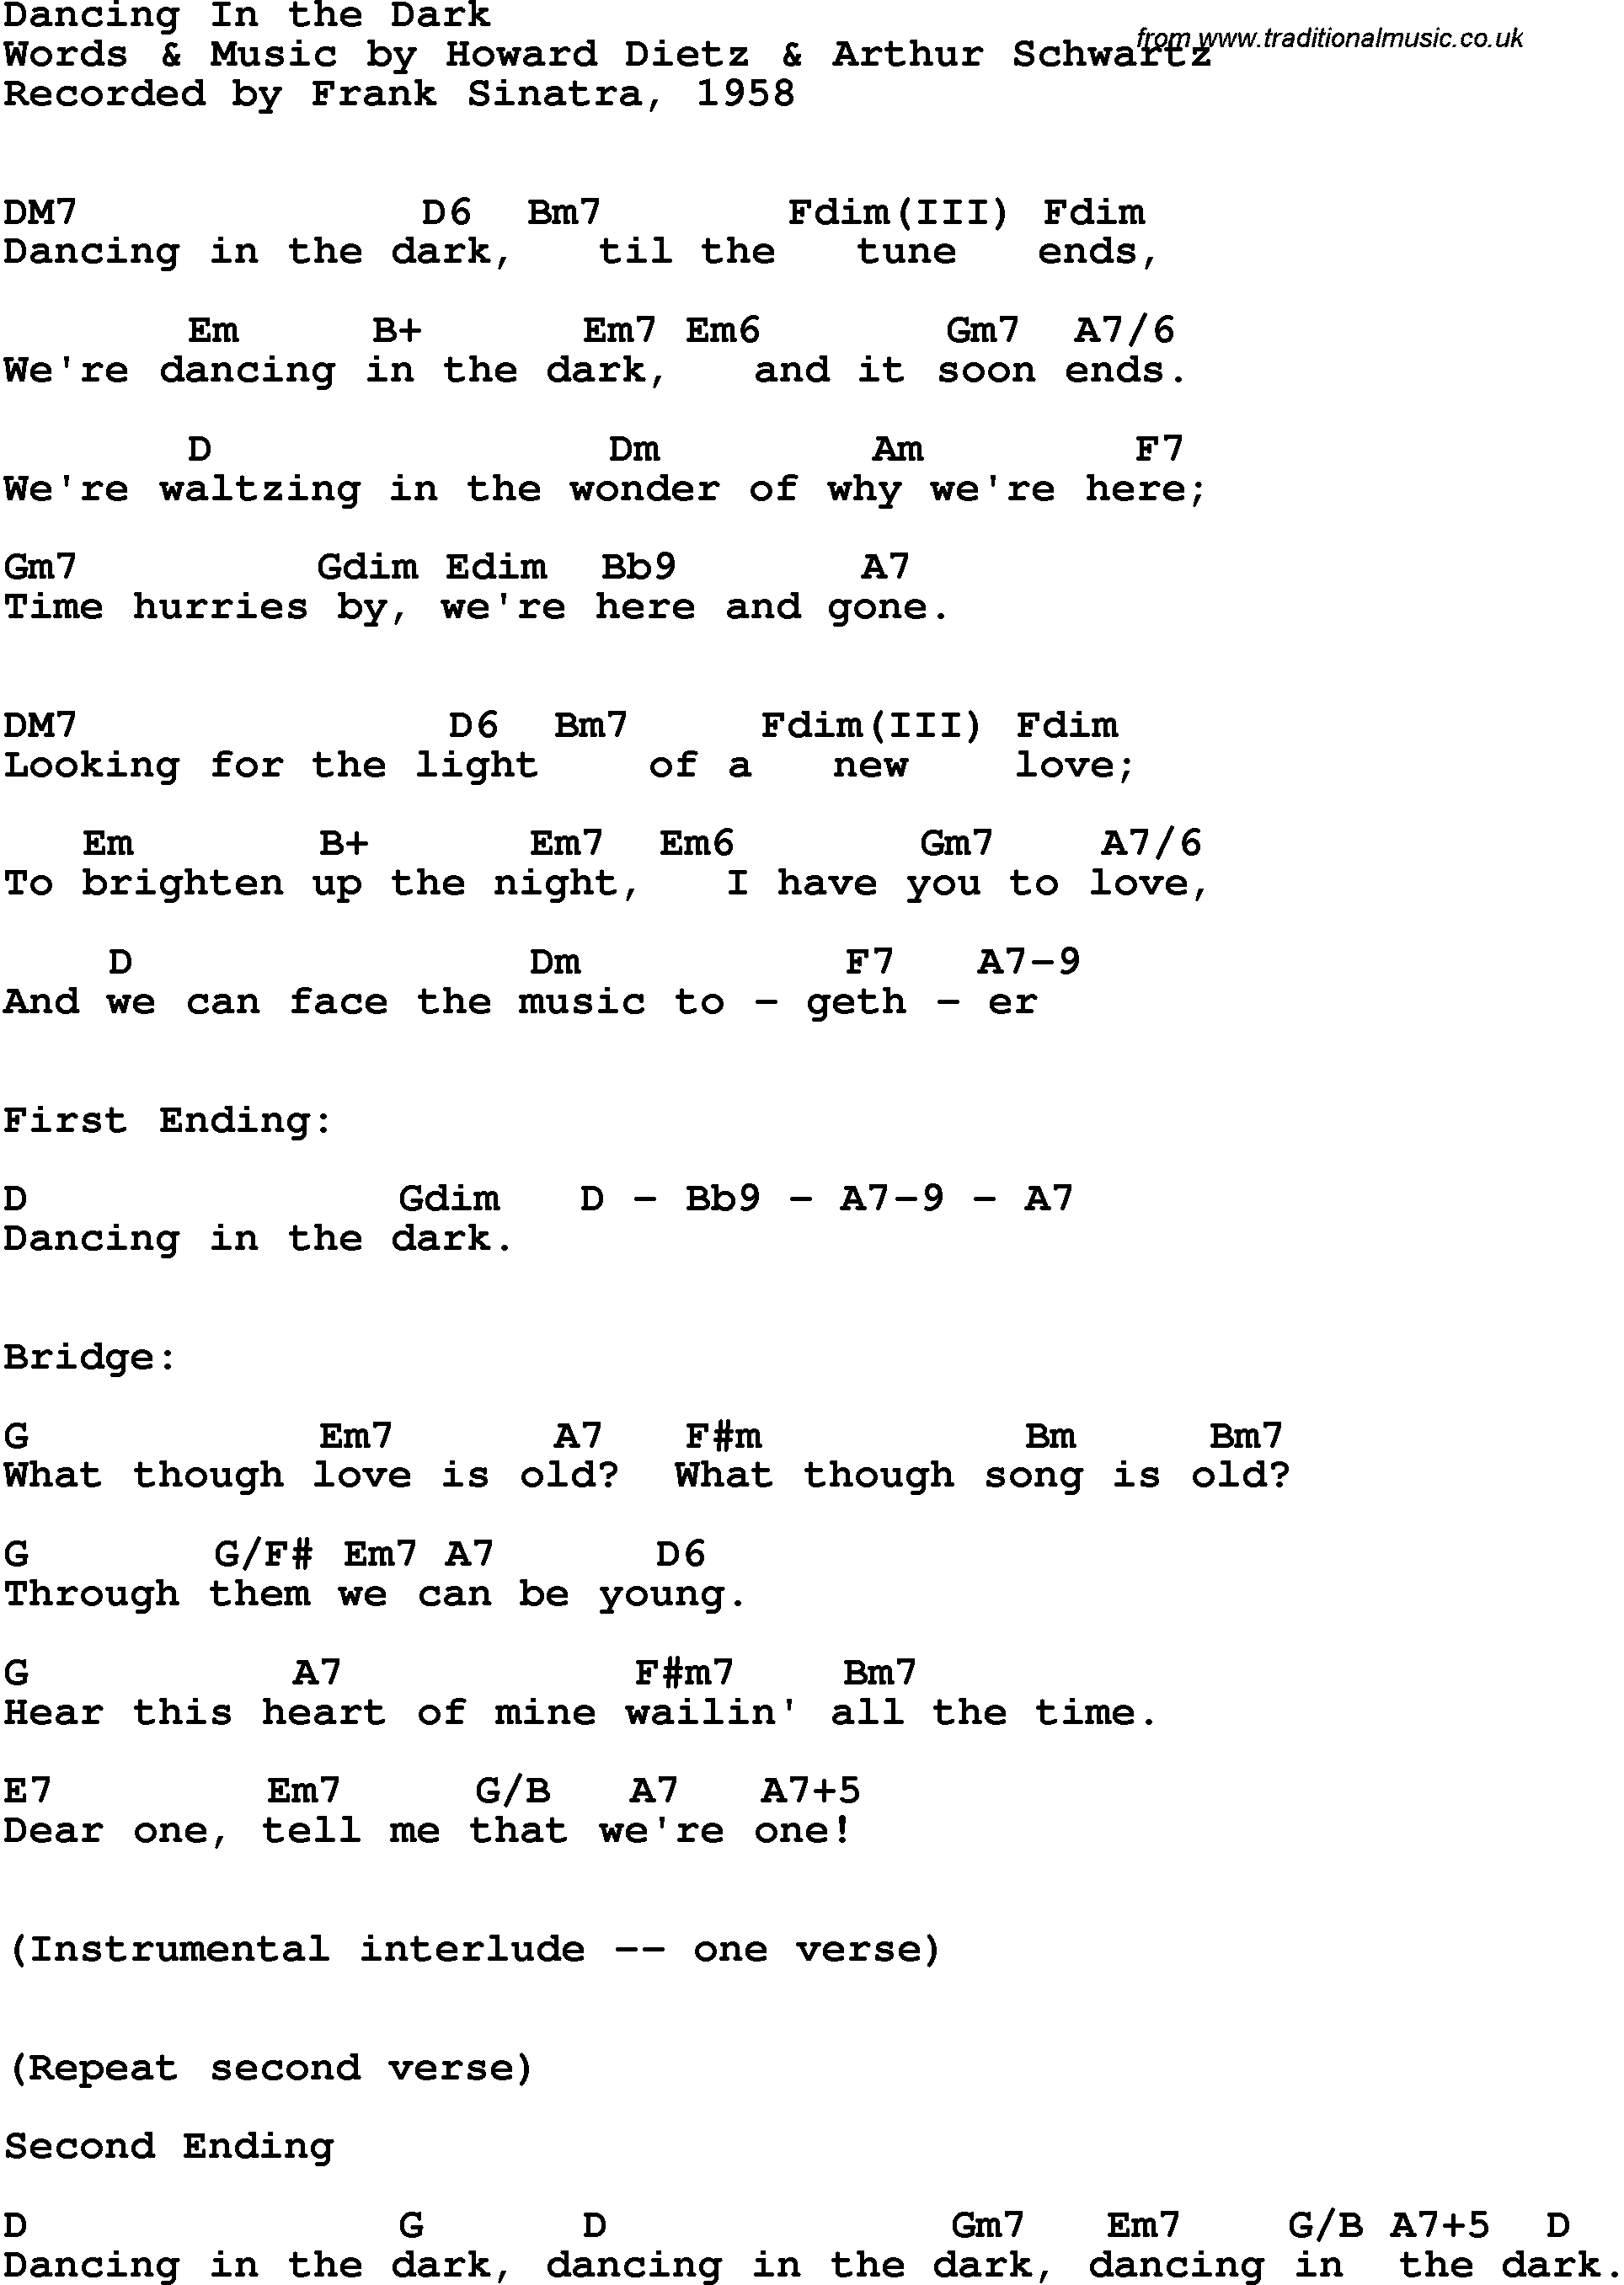 Song Lyrics with guitar chords for Dancing In The Dark - Frank Sinatra, 1958